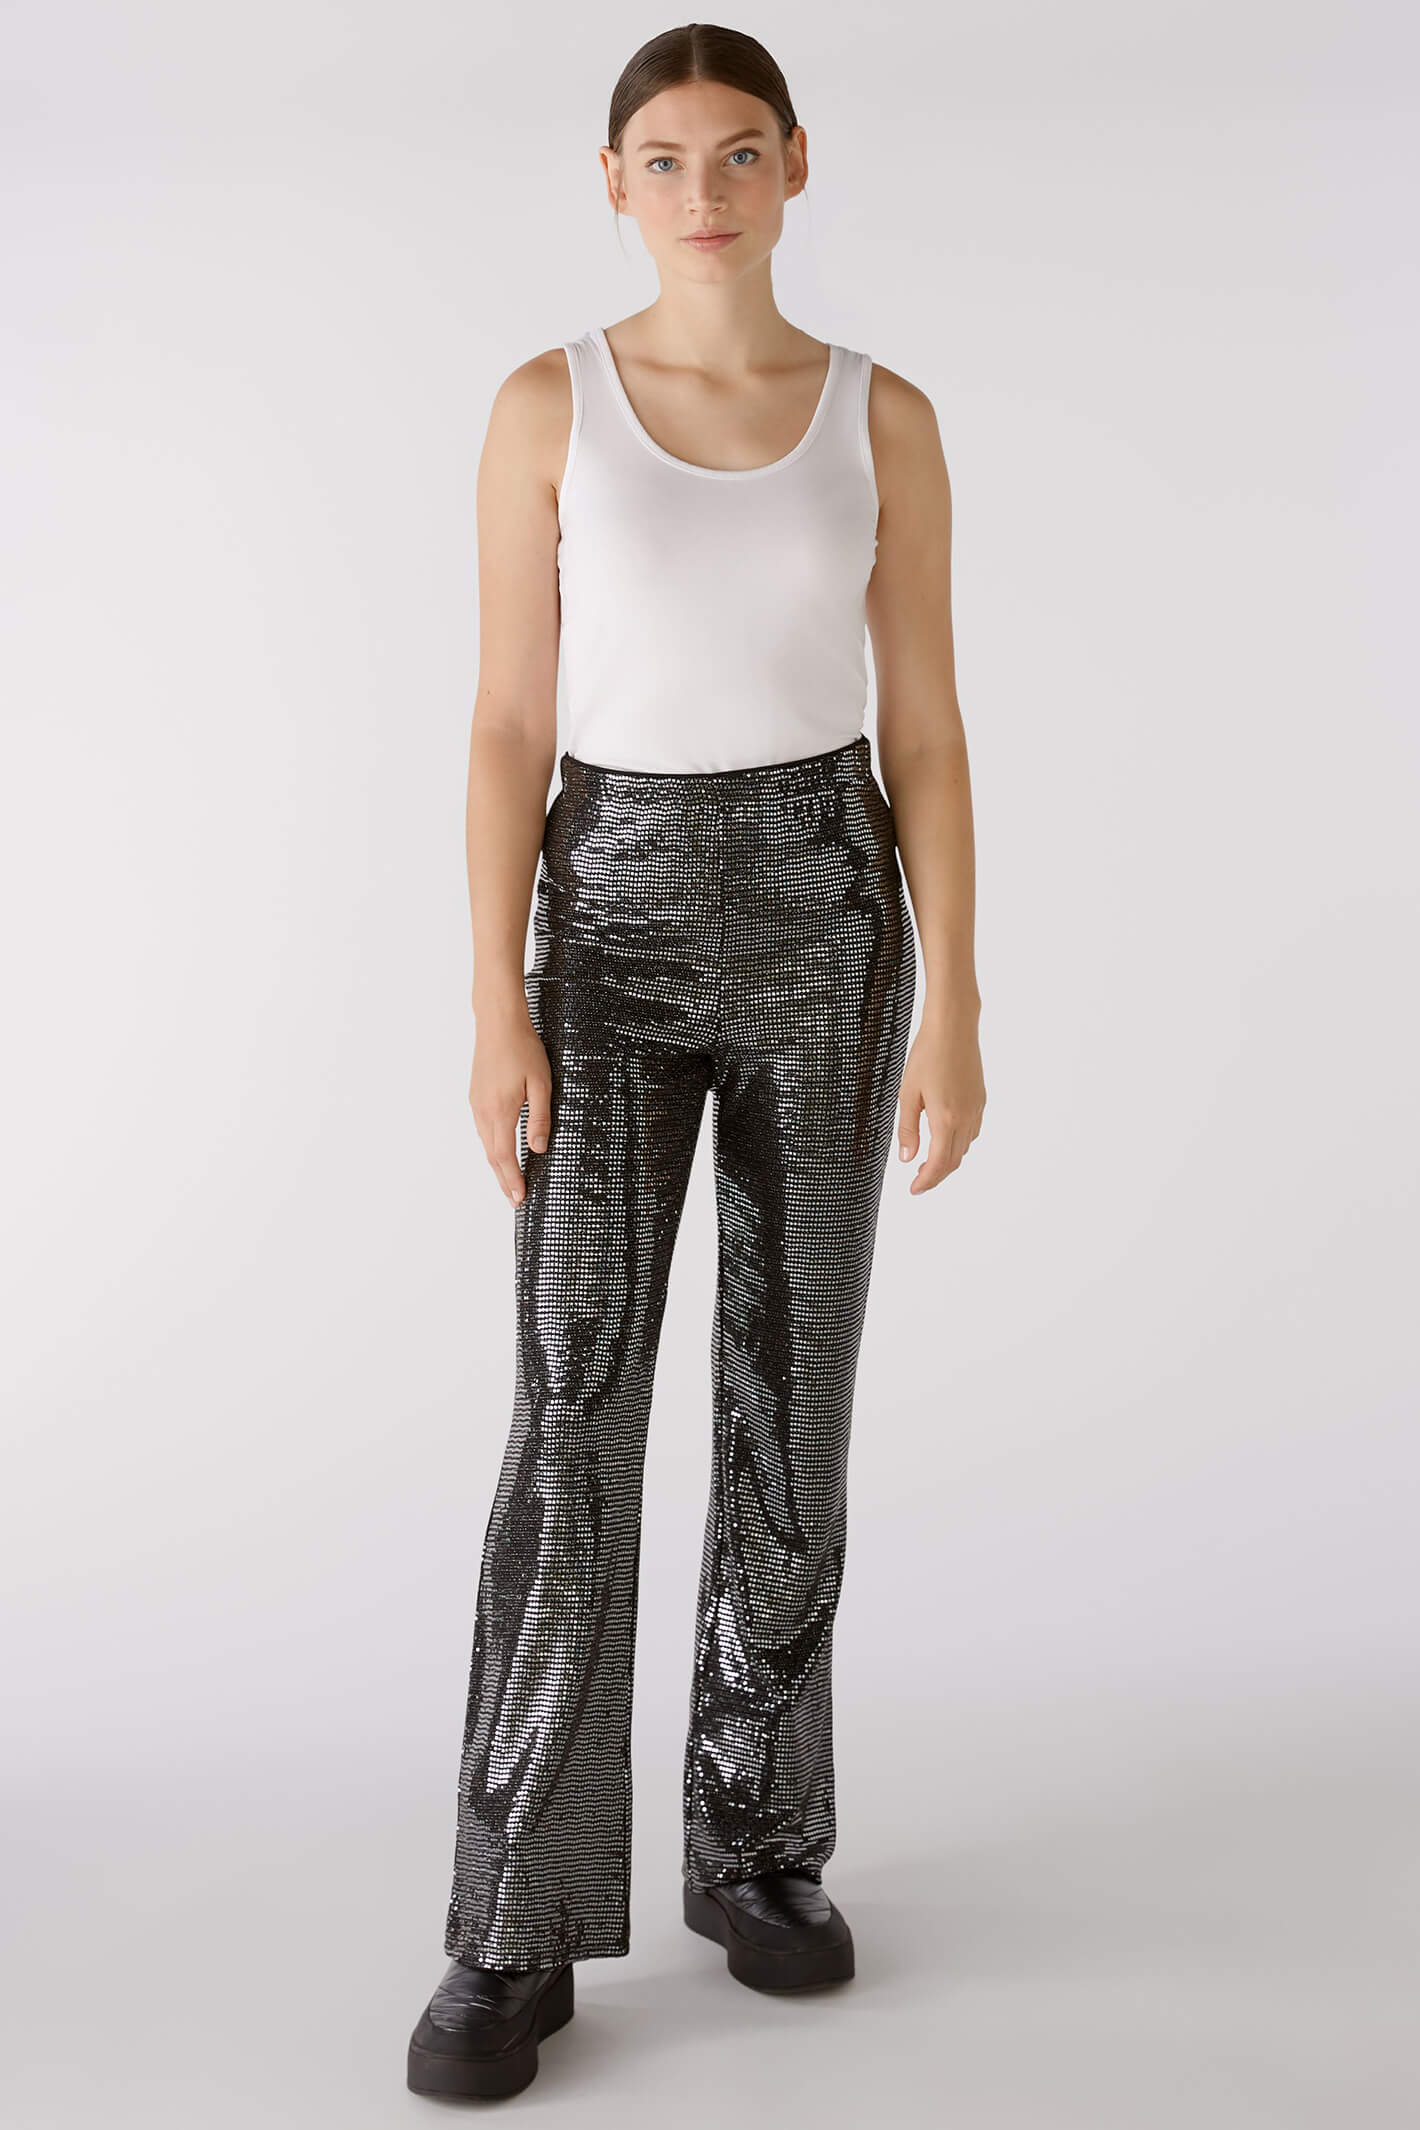 Silver Sequin Trousers | Sustainable Womenswear | Albaray